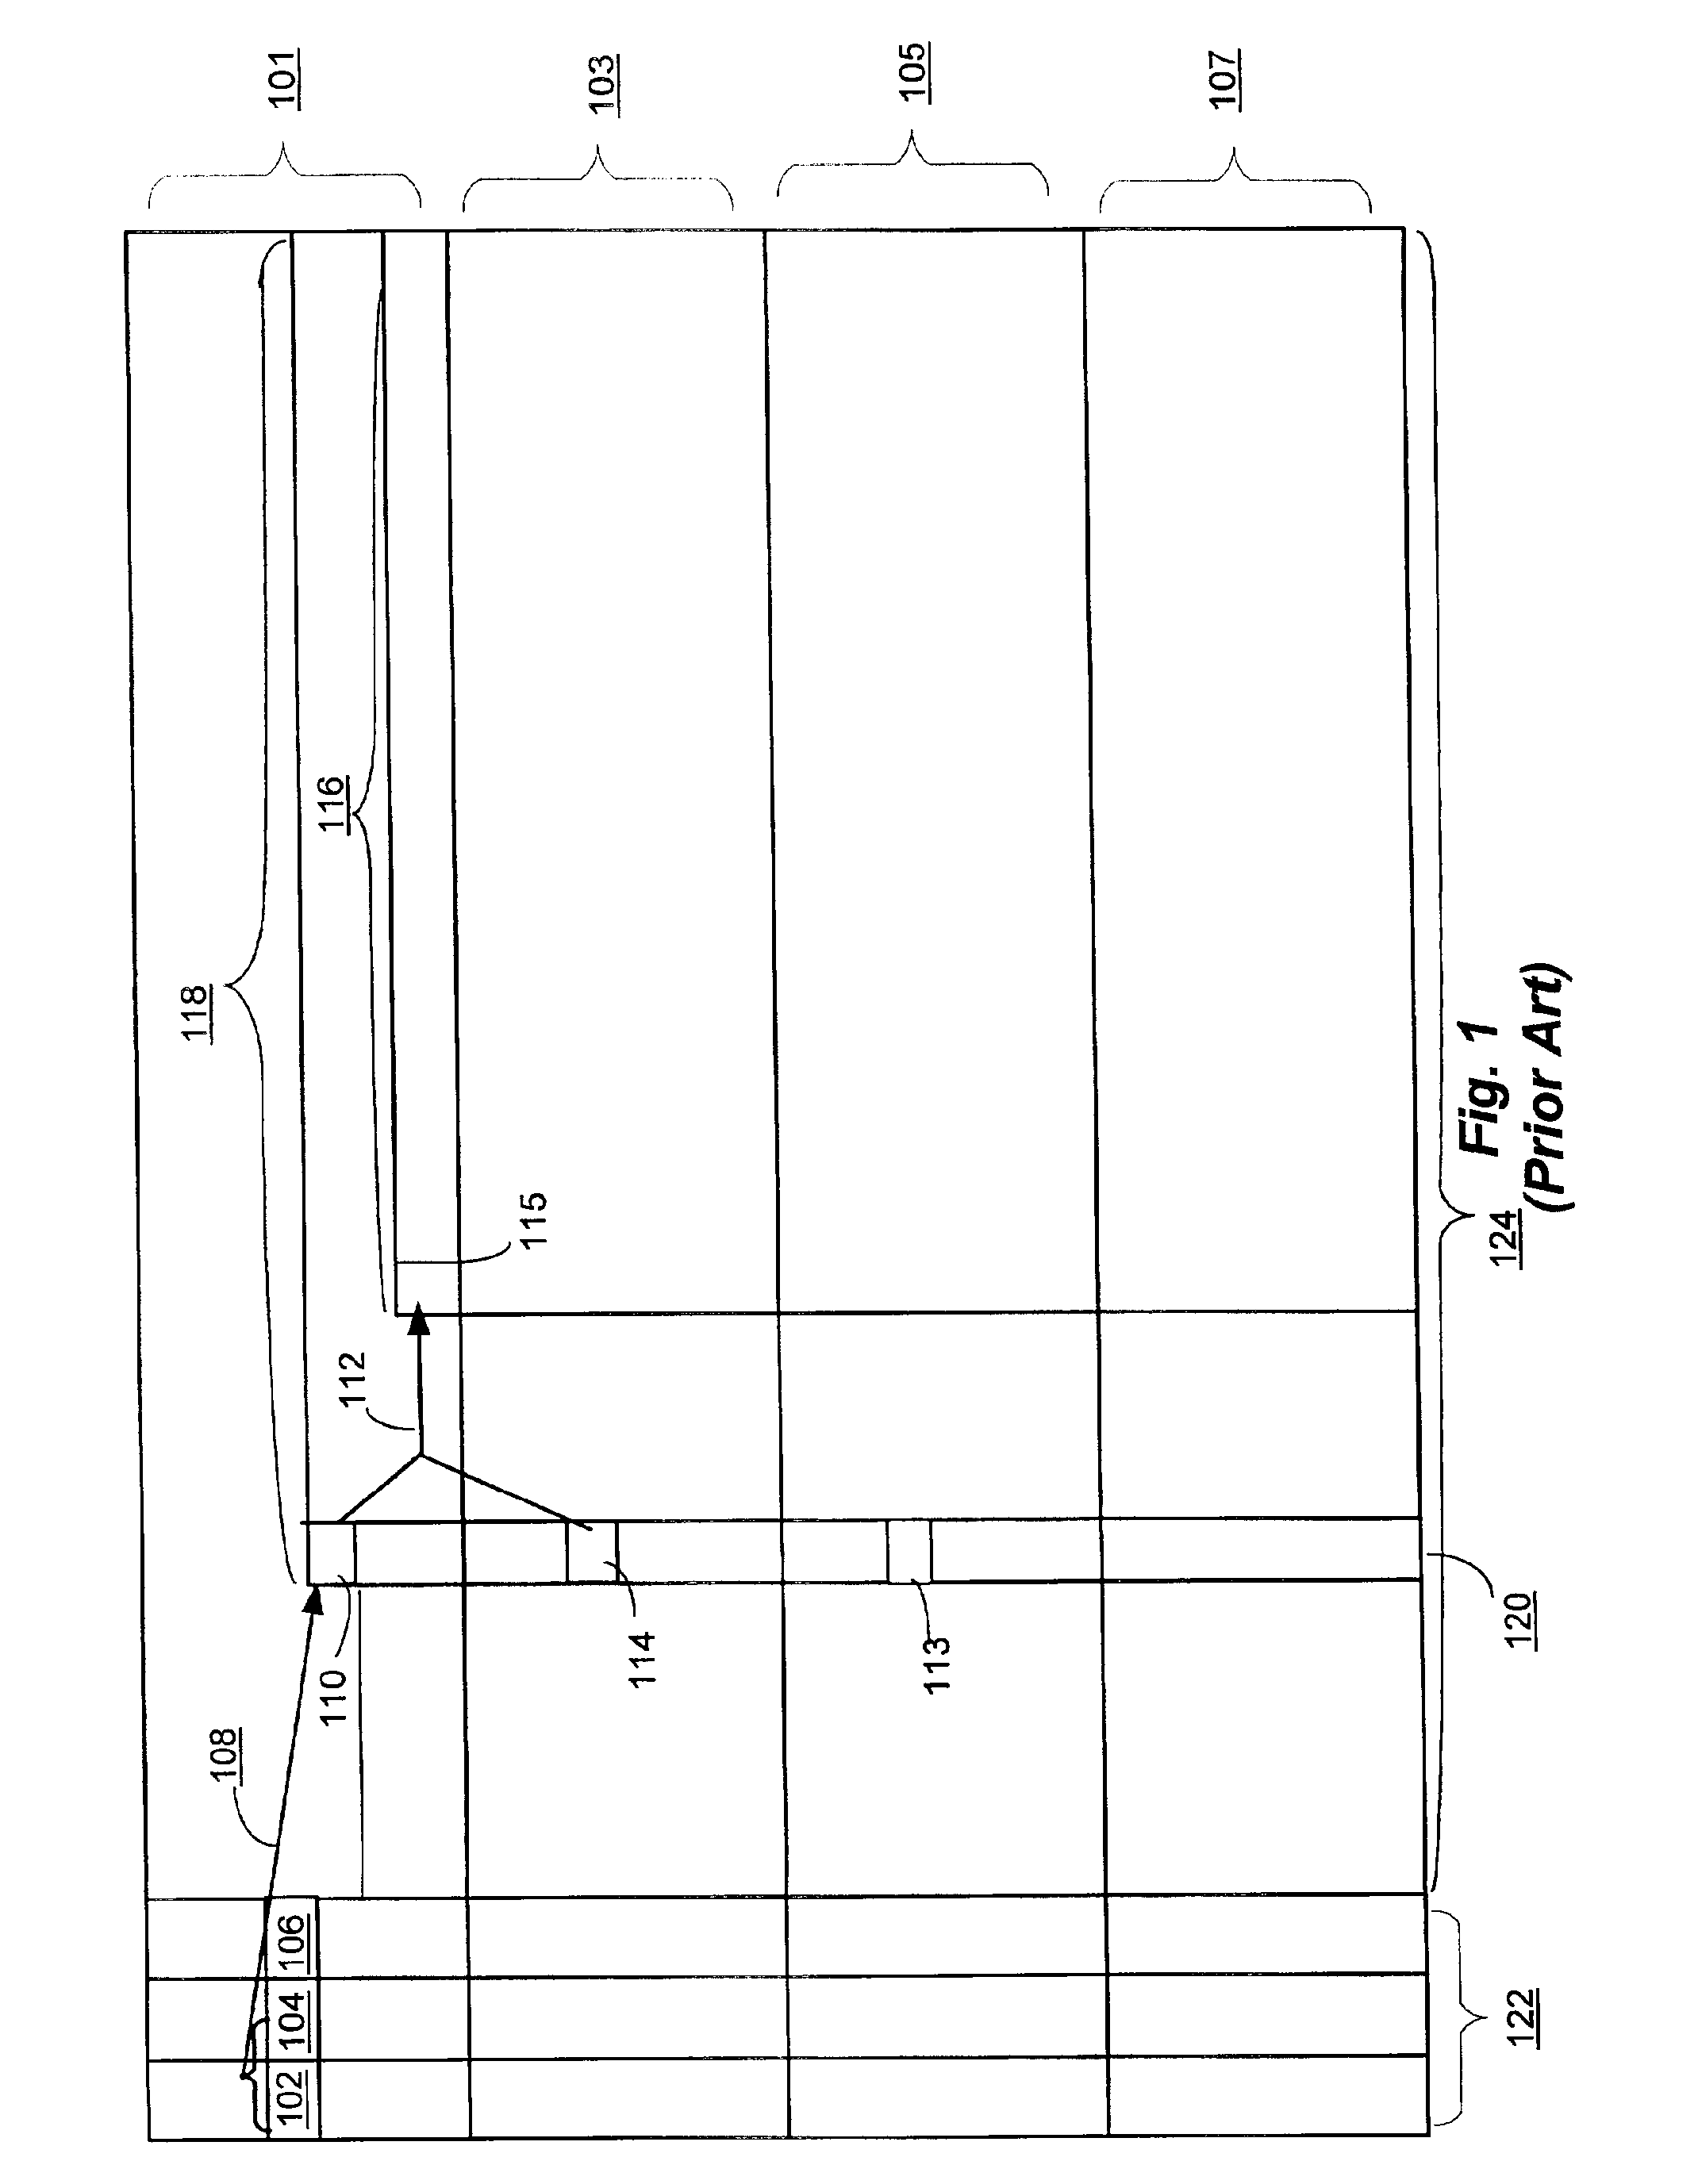 Pointer adjustment wander and jitter reduction apparatus for a desynchronizer